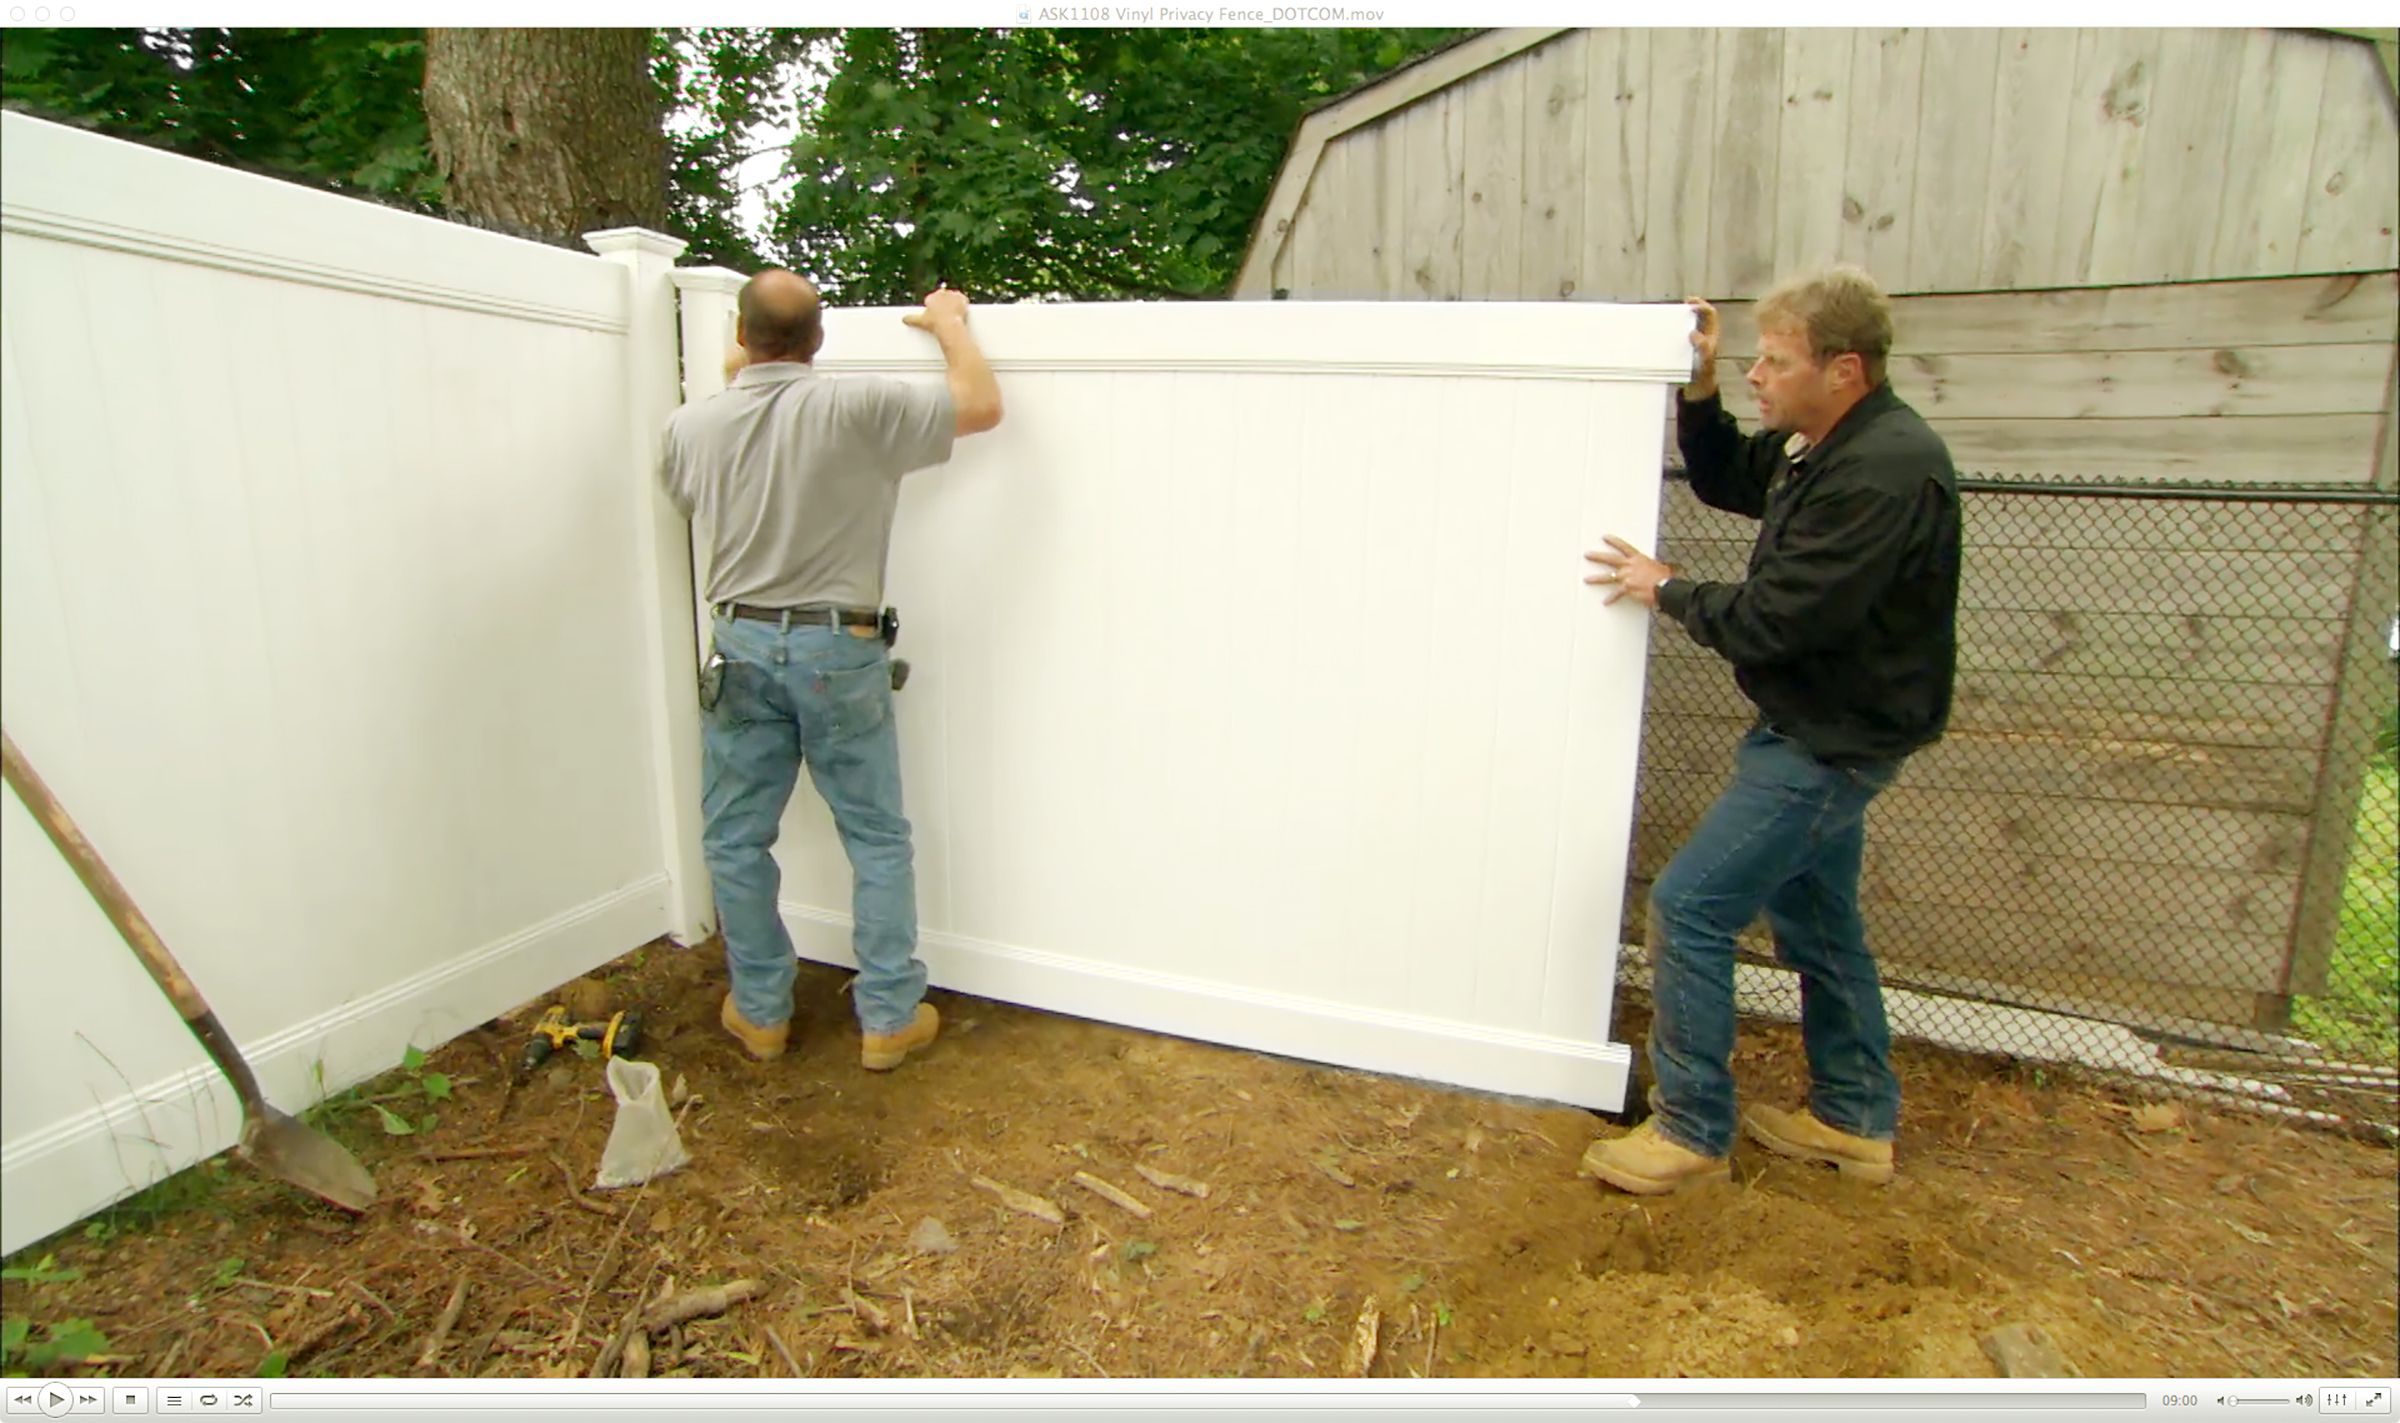 Privacy Fence Installation (VIDEO) and Instructions